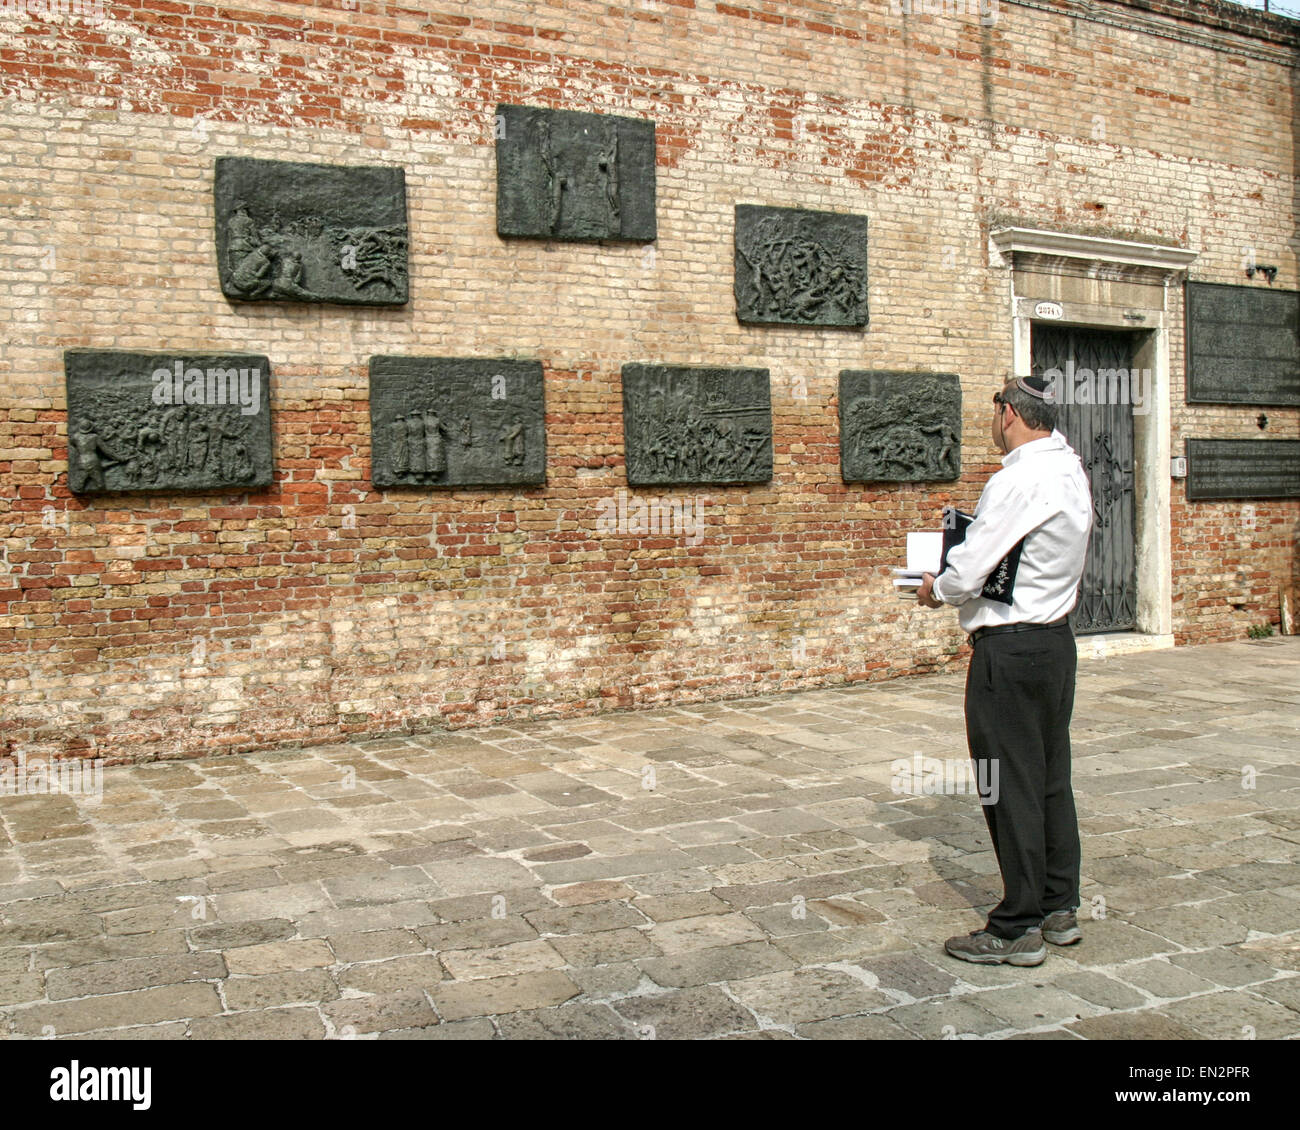 Venice, Province of Venice, ITALY. 7th Oct, 2004. An orthodox Jewish man, holding a prayer book with his prayer shawl under his arm views the seven-panel bronze bas-relief Holocaust memorial, on a wall of the Campo del Nuovo Ghetto by Arbit Blatas, a Lithuanian-born artist who lost his mother in the Holocaust. It commemorates the night of Dec. 5, 1943, when the first 200 of the city's Jews were rounded up and marched out for deportation and death. Venice, a UNESCO World Heritage Site, is one of the most popular international tourist destinations. © Arnold Drapkin/ZUMA Wire/Alamy Live News Stock Photo